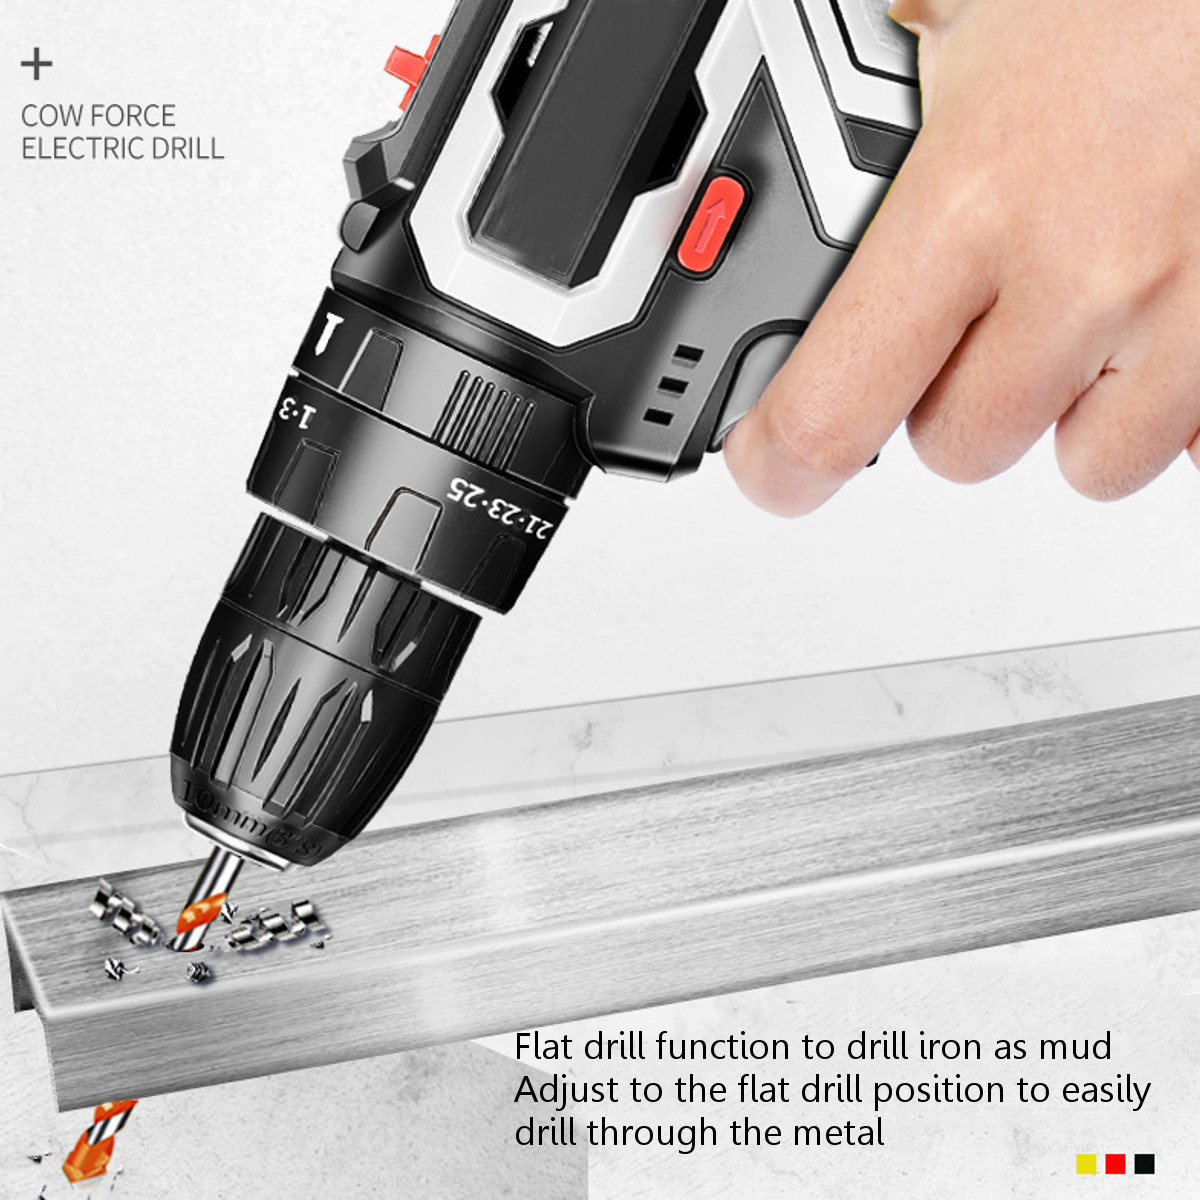 12V-1500mAH-25NM-Rechargeable-Cordless-Drill-2-Speeds-Electric-Screwdriver-Power-Tool-1736770-8